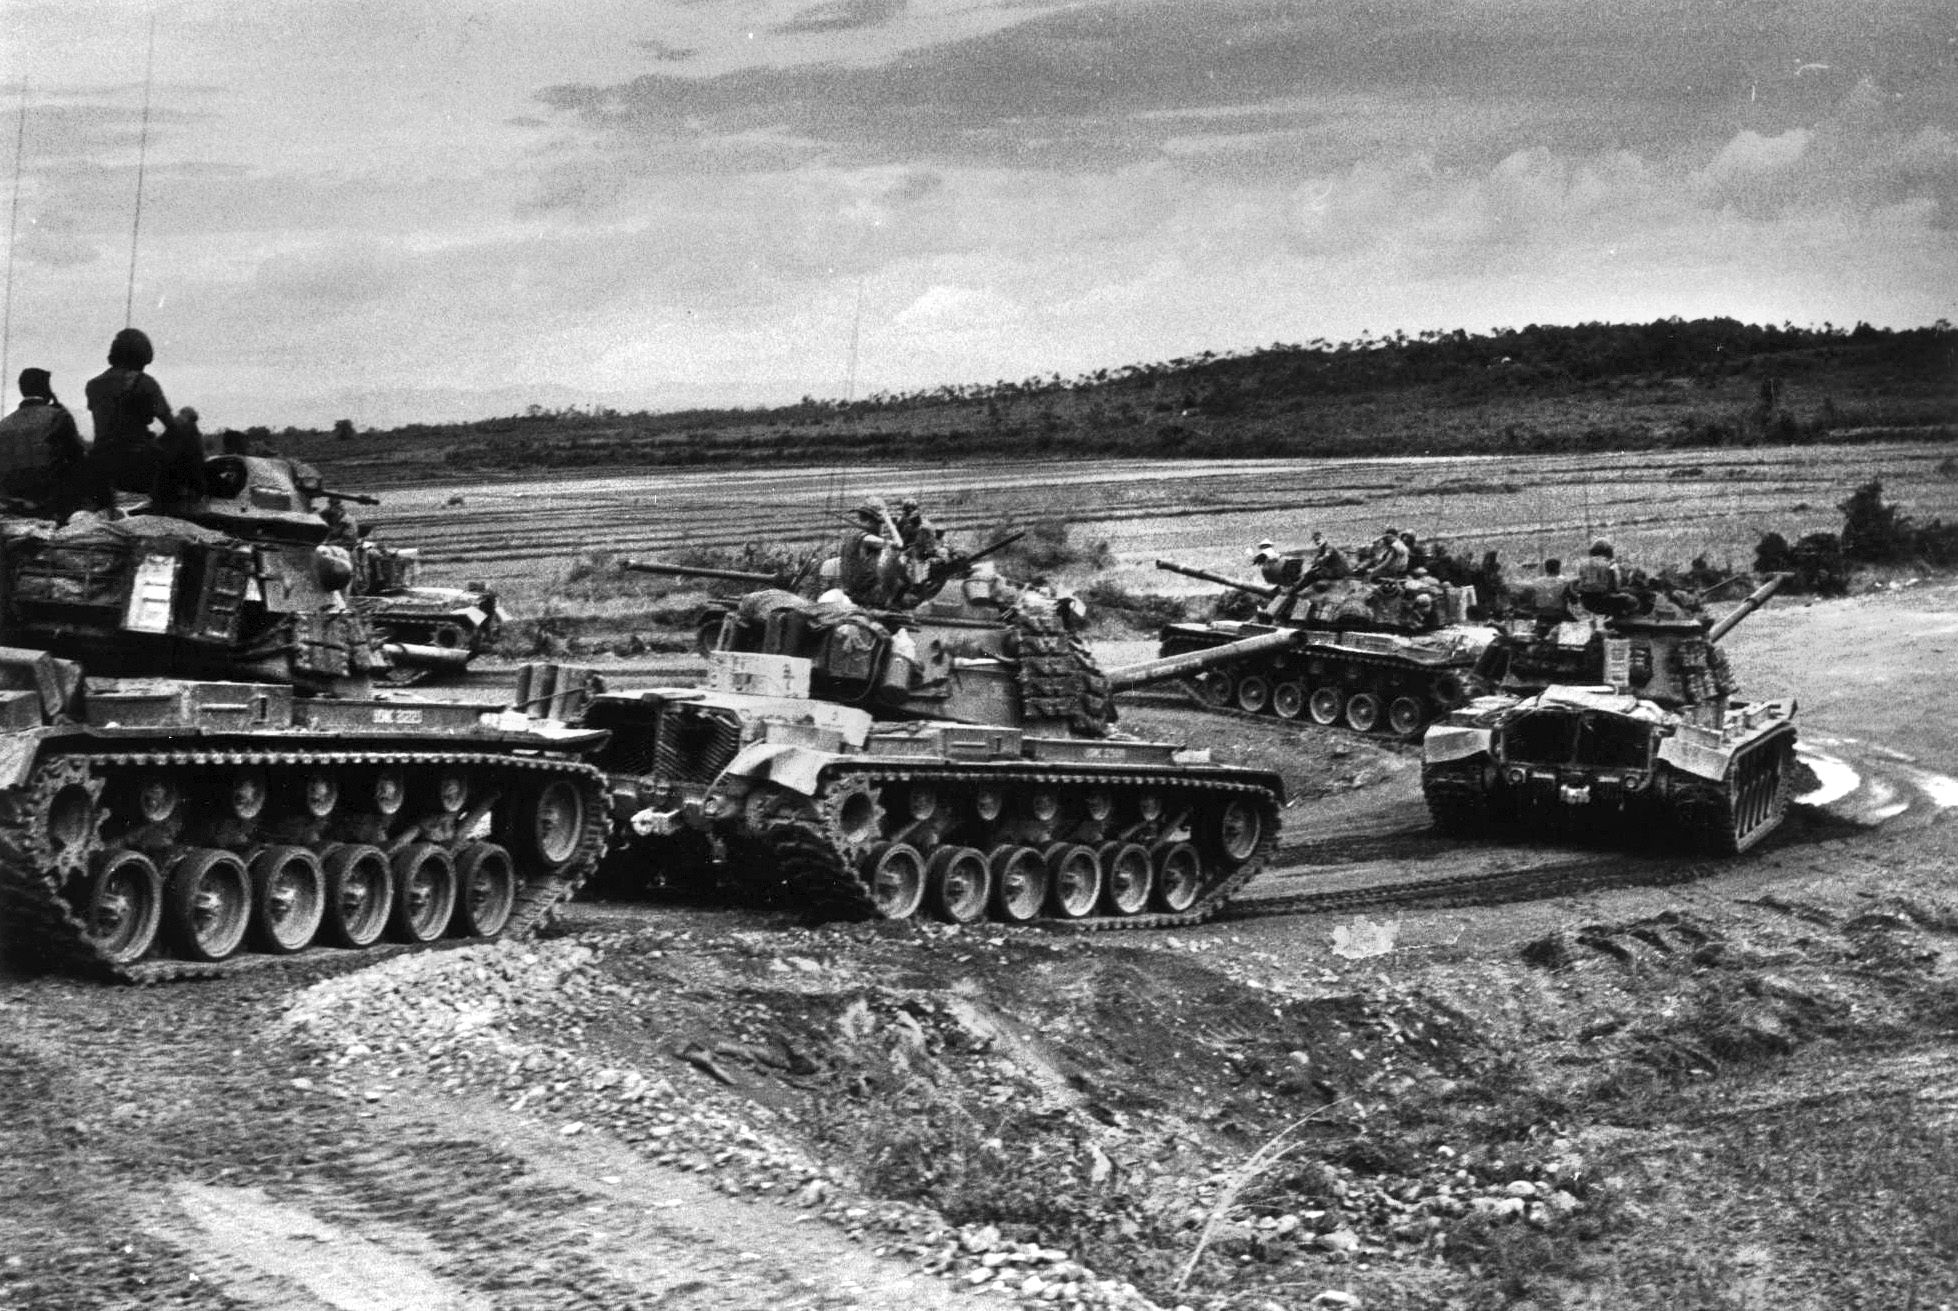 As fighting south of the DMZ reached a fever pitch in 1968 the Marines boosted their firepower by deploying more tank battalions in forward positions. The M48A3’s powerful 90mm gun proved highly effective in destroying enemy bunkers.